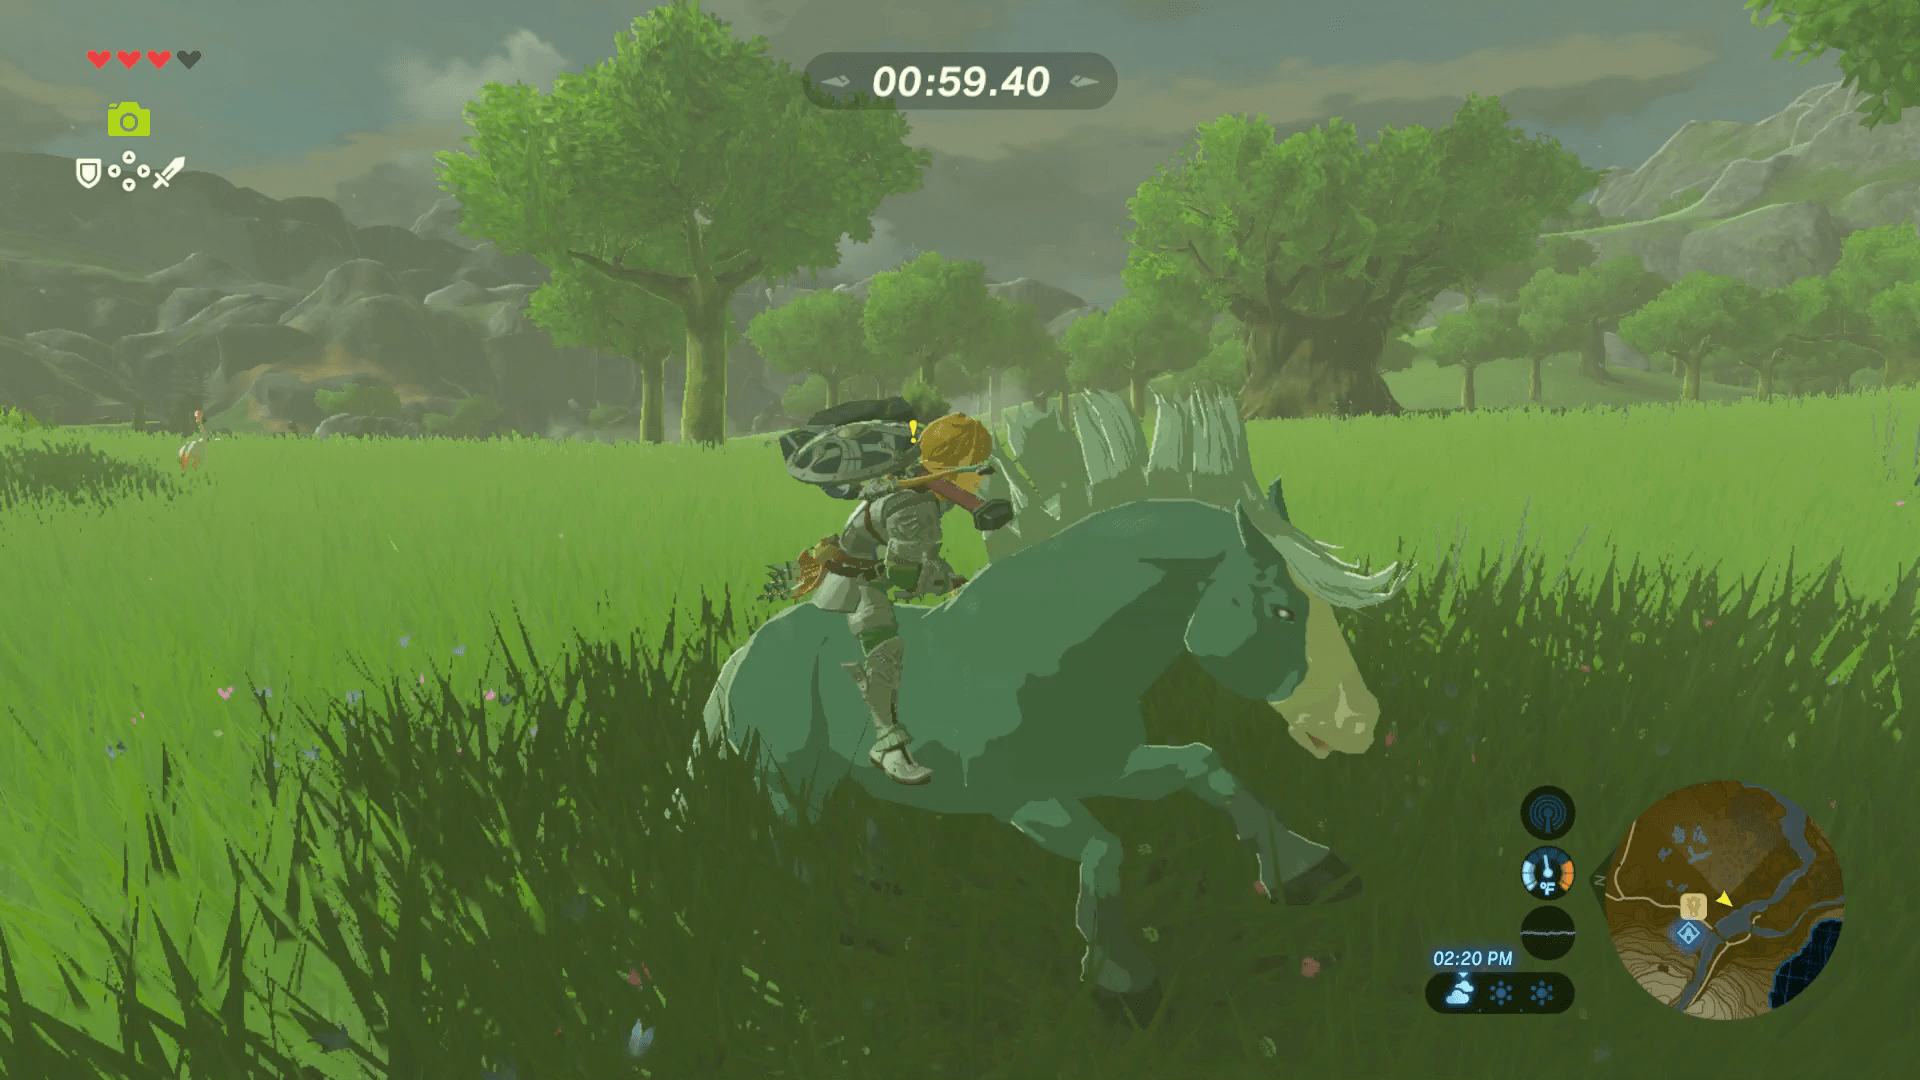 Tips For Playing The Legend Of Zelda: Breath Of The Wild